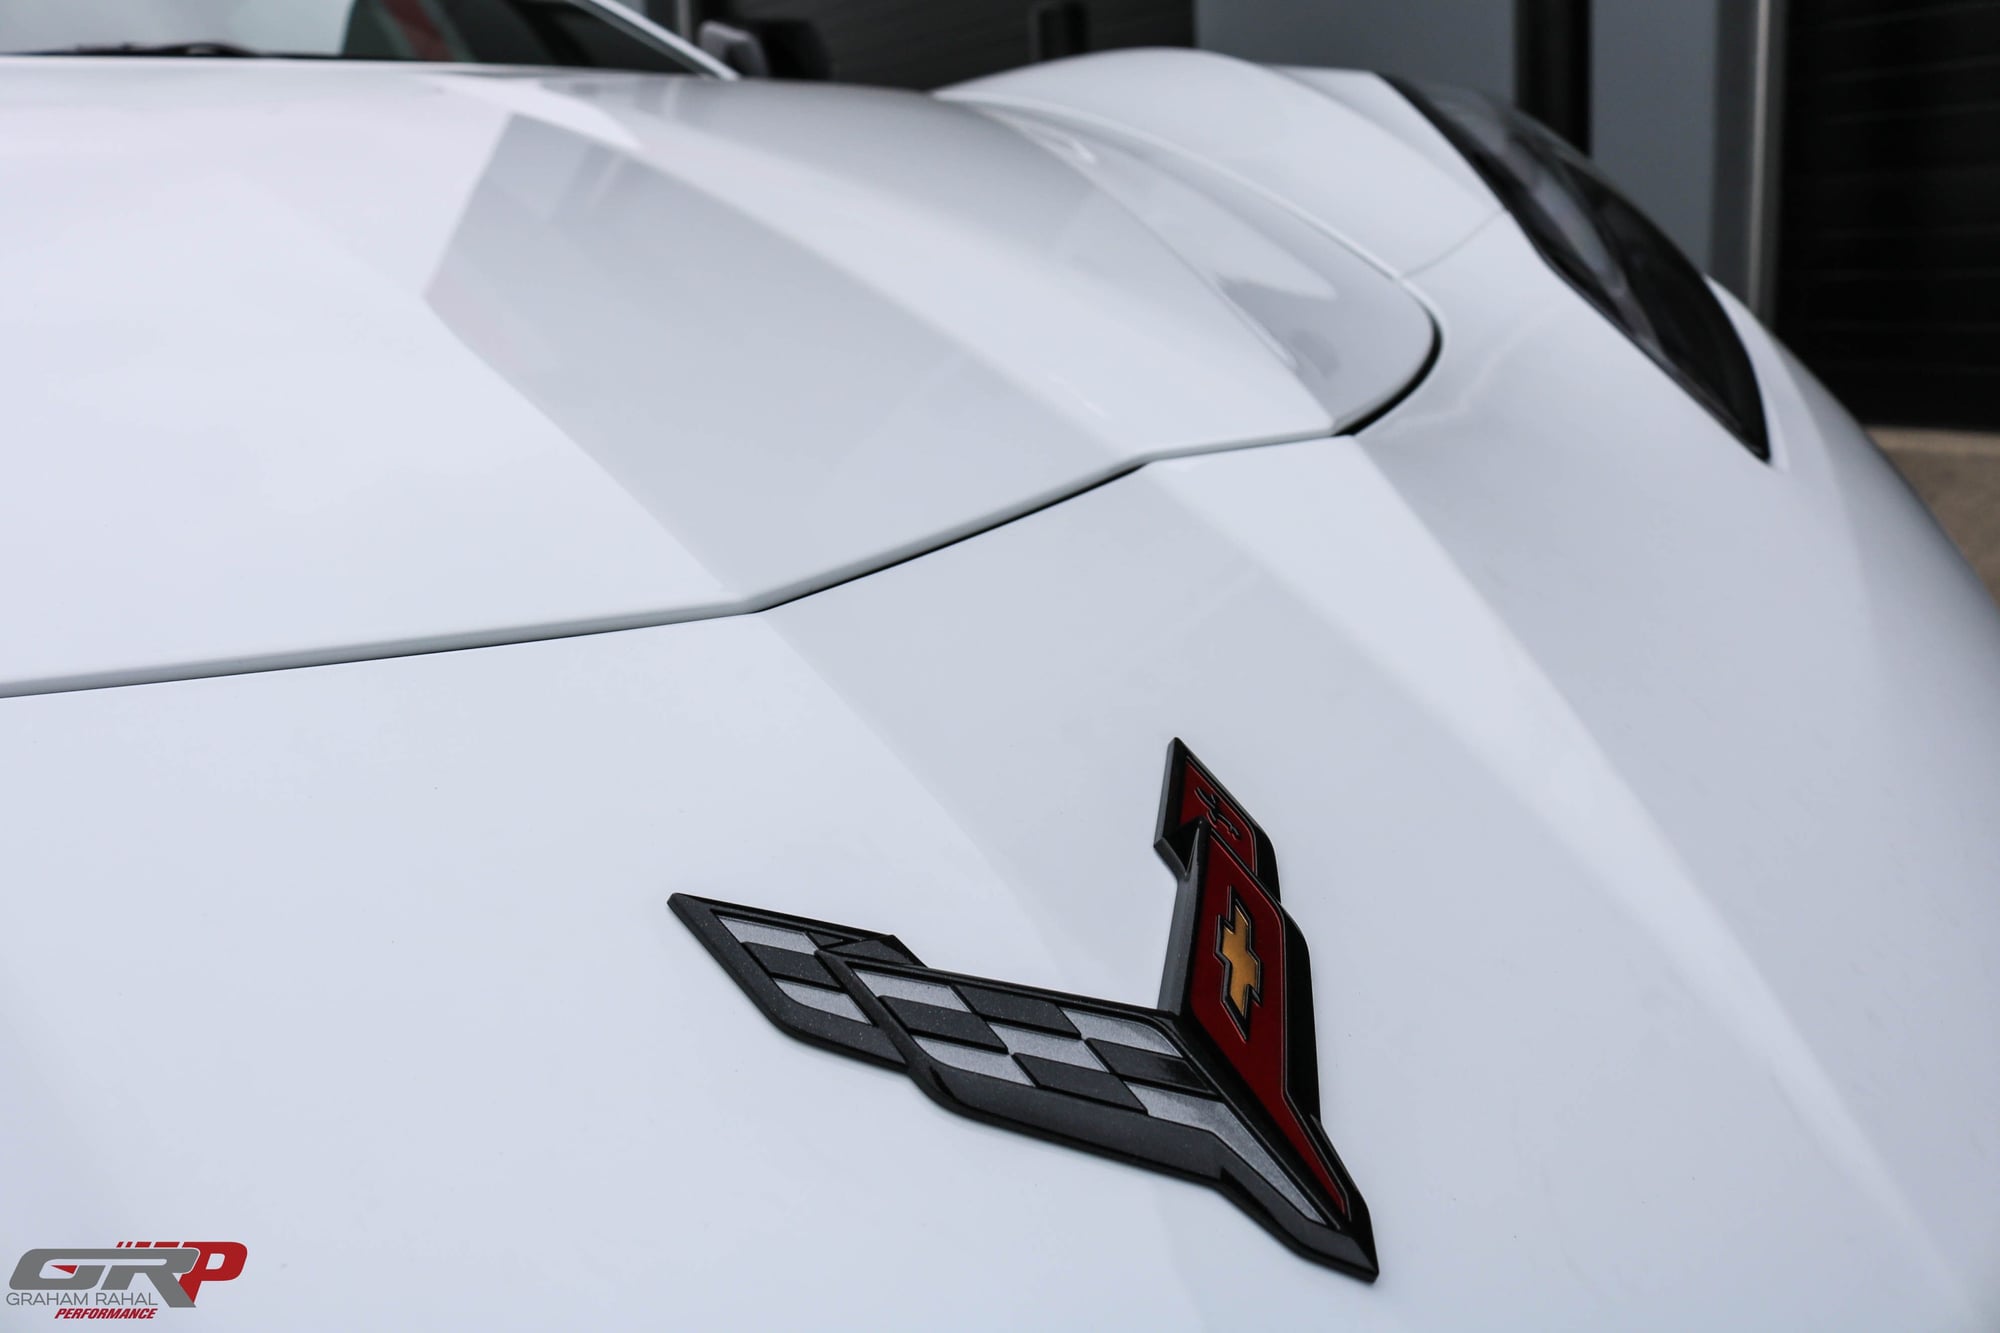 2020 Chevrolet Corvette - 2020 Chevrolet Corvette 3LT w/ Z51 Package - Used - VIN 1G1Y82D41L5101794 - 95 Miles - 8 cyl - 2WD - Automatic - Coupe - White - Brownsburg, IN 46112, United States